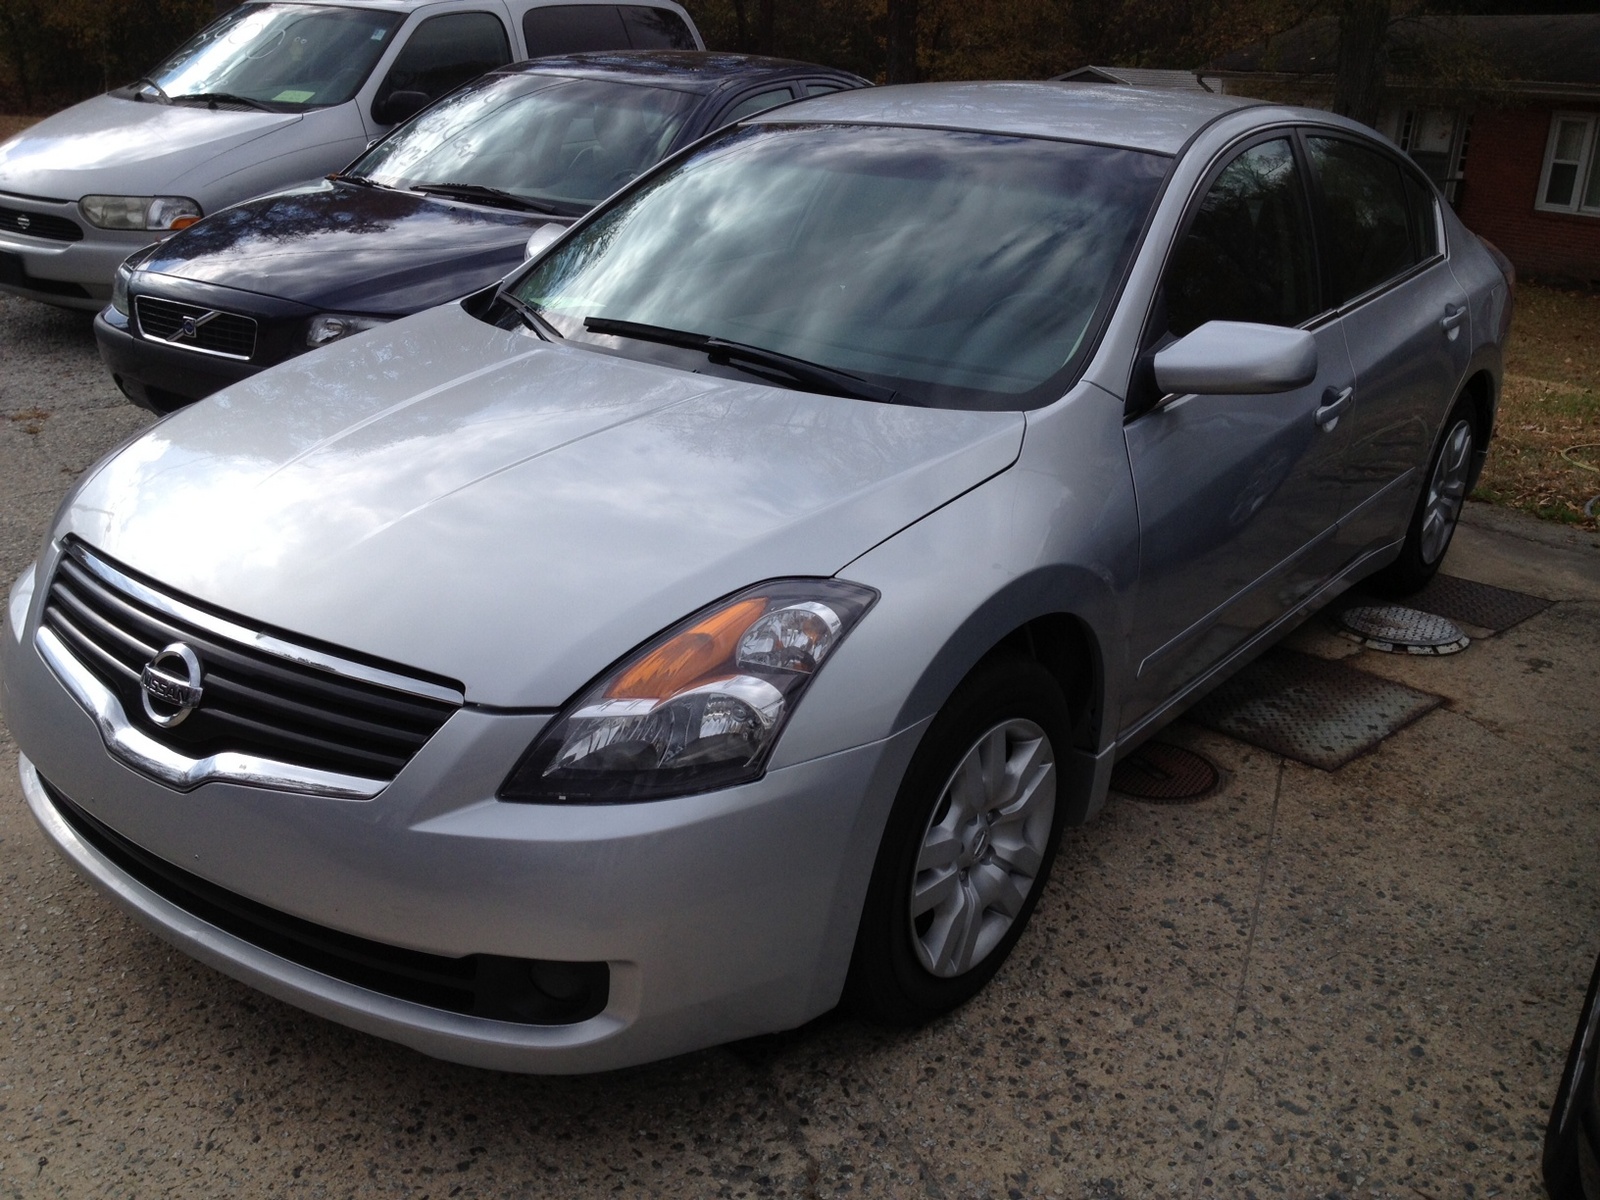 2009 Nissan altima cost to own #3